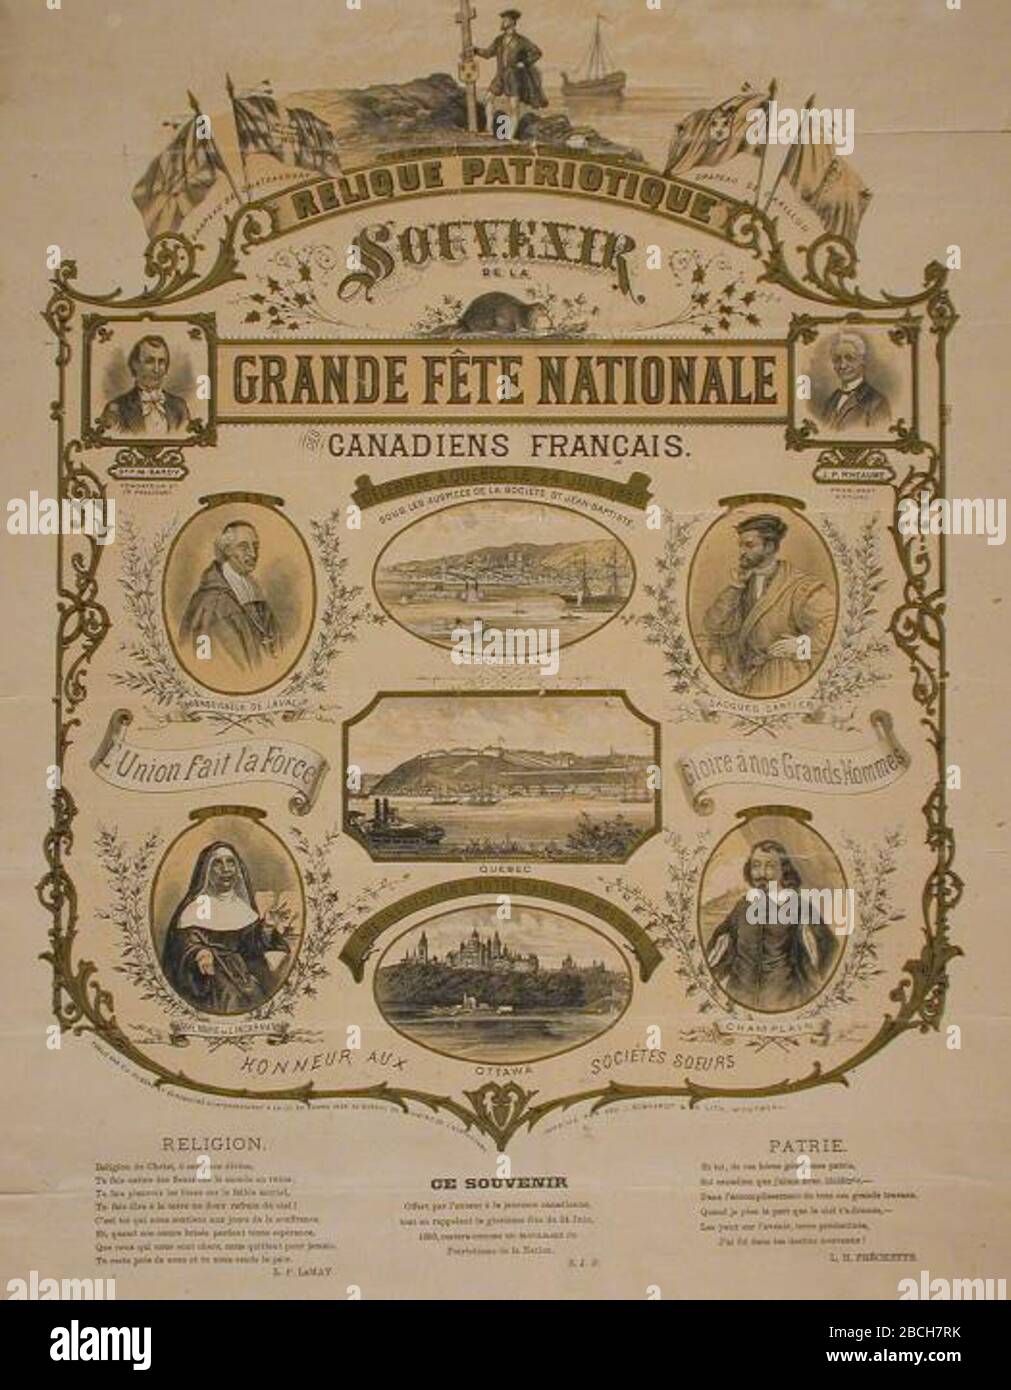 English: Patriotic relic; A Souvenir of the Great National Celebration of  French Canadians, celebrated at Quebec City on June 24, 1880 - Our  institutions, our language, our laws - Honour to our